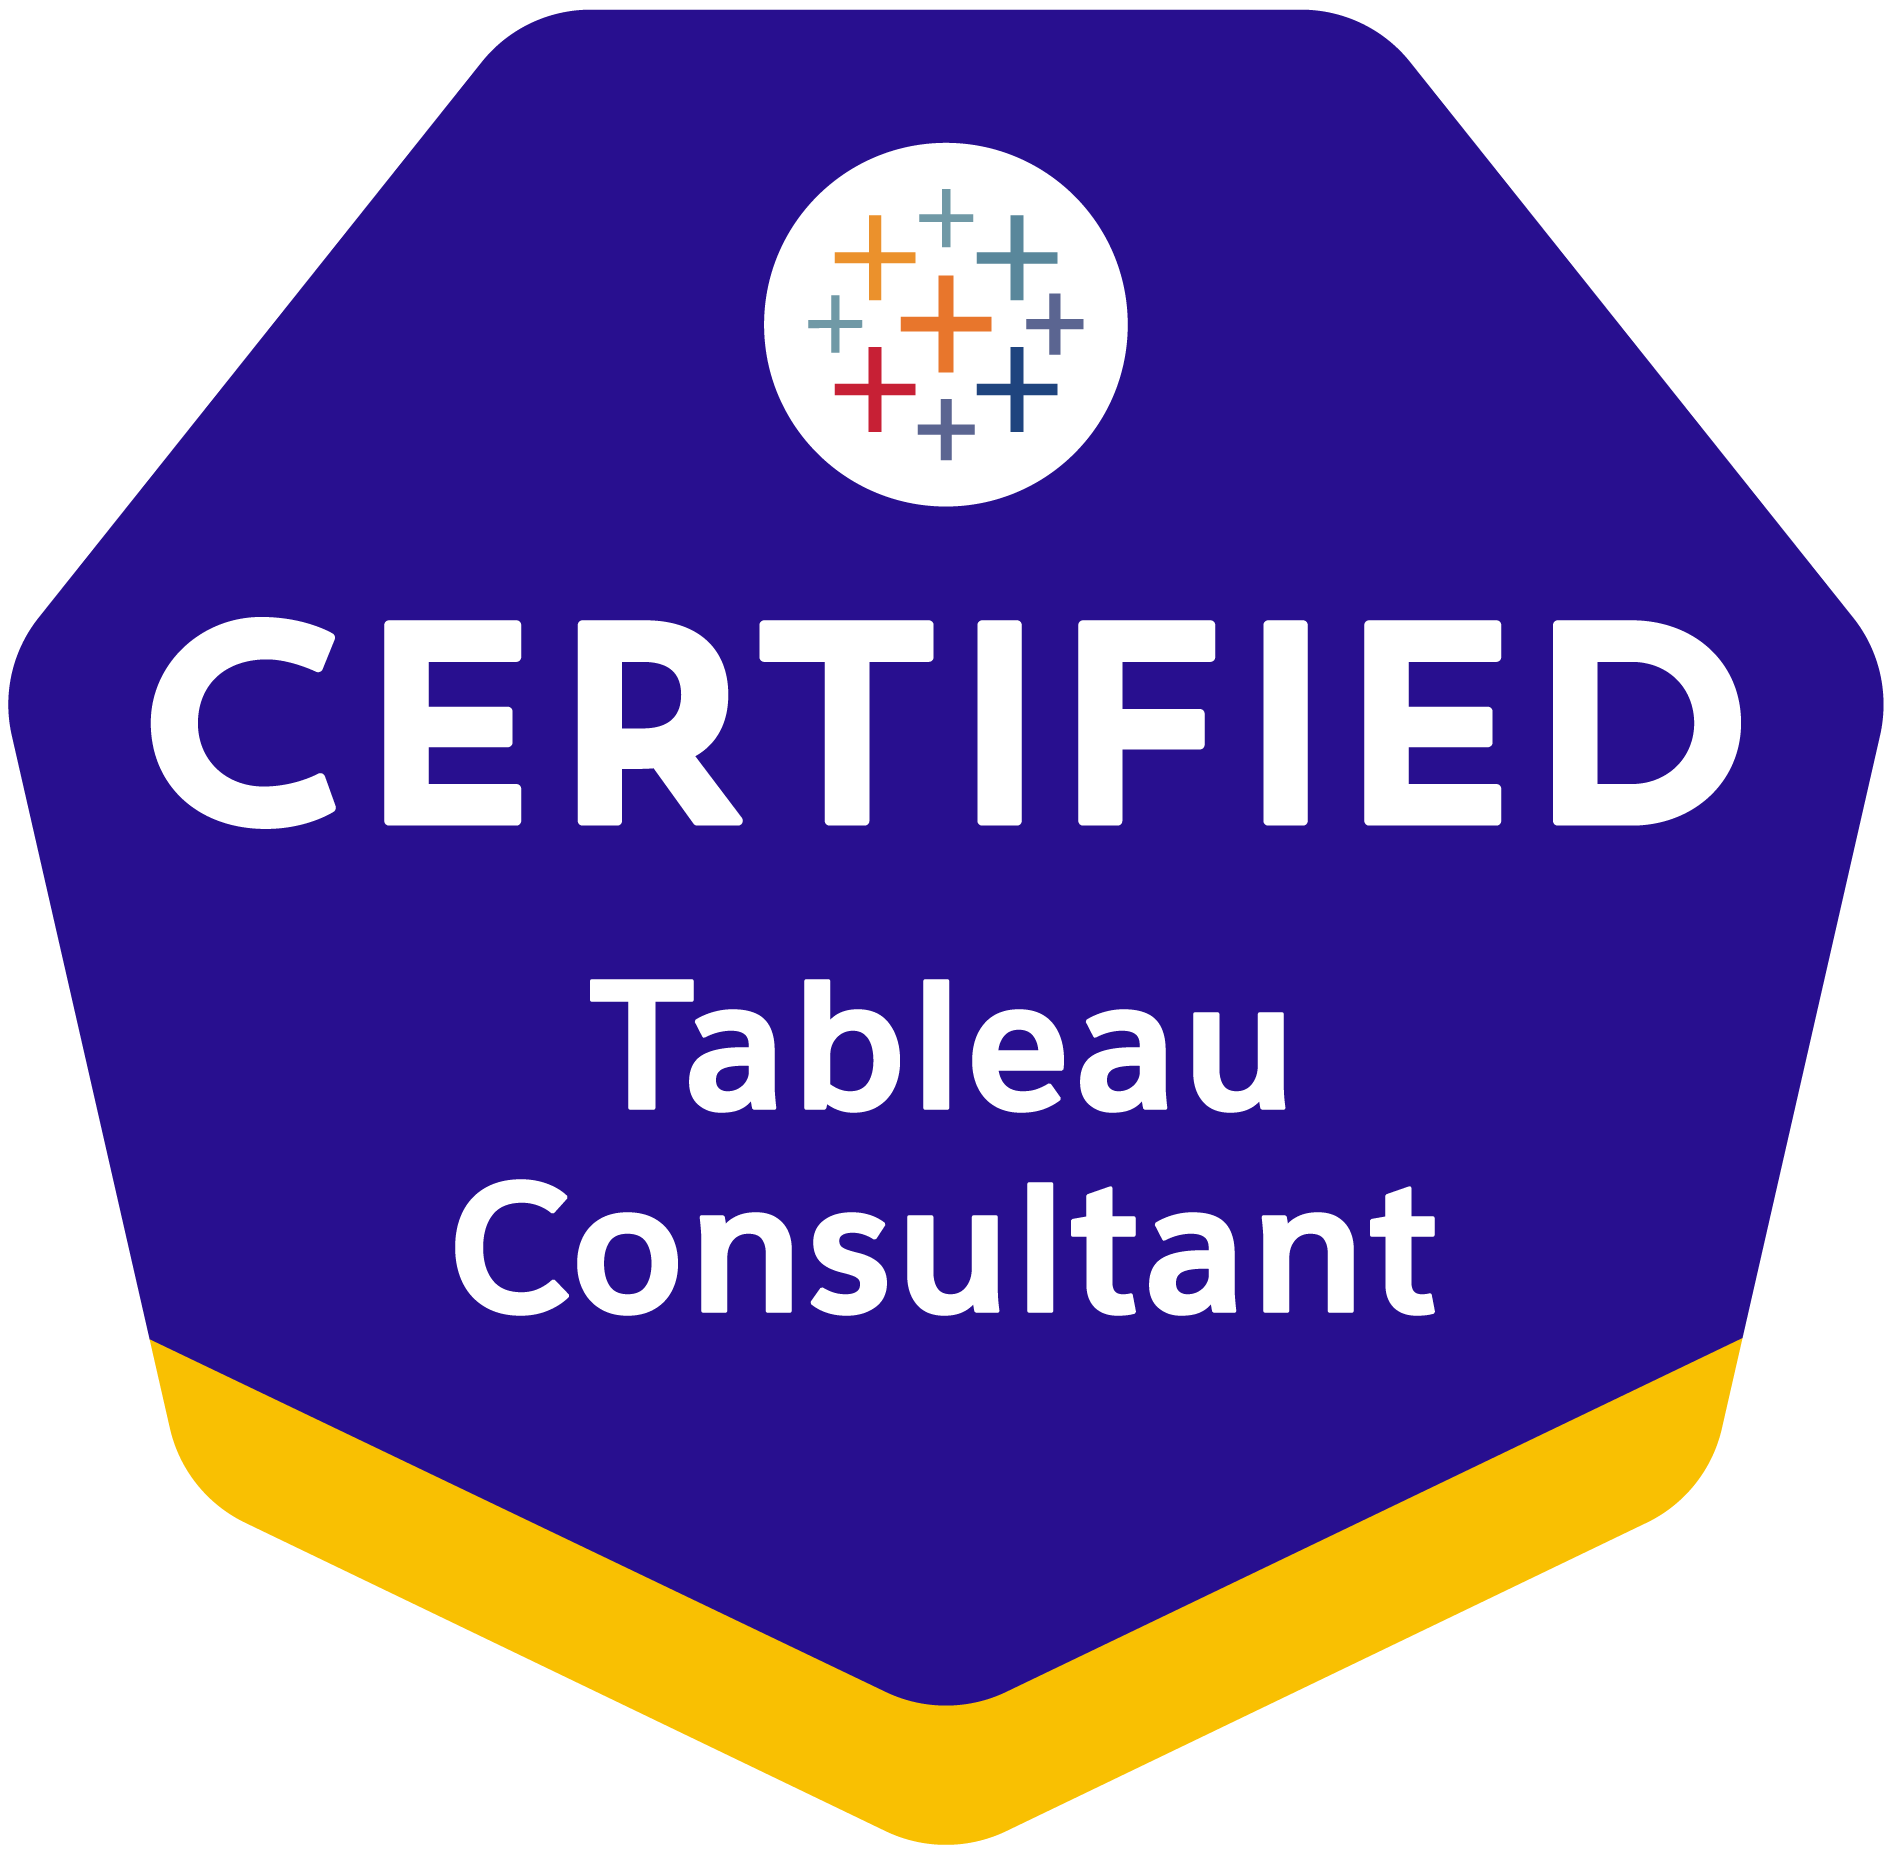 The Tableau Certified Consultant Certification